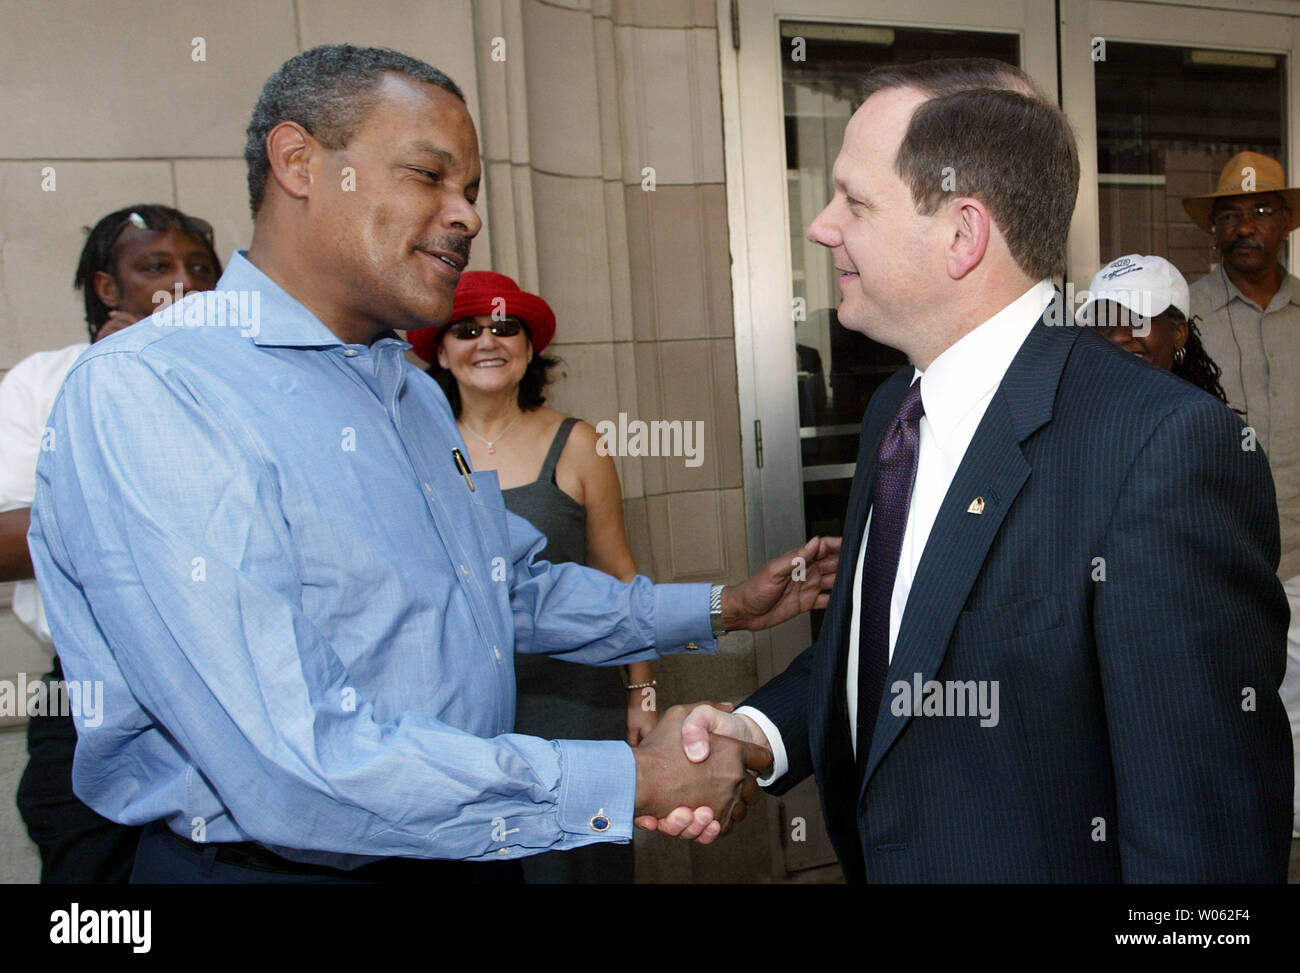 St. Louis mayor Francis Slay (R) greets East St. Louis Illinois mayor Carl Officer before a ceremony for dancer Katherine Dunham in St. Louis on June 24, 2005. Dunham, 96, a modern dance legend, is moving back to nearby East St. Louis, IL from New York. (UPI Photo/Bill Greenblatt) Stock Photo